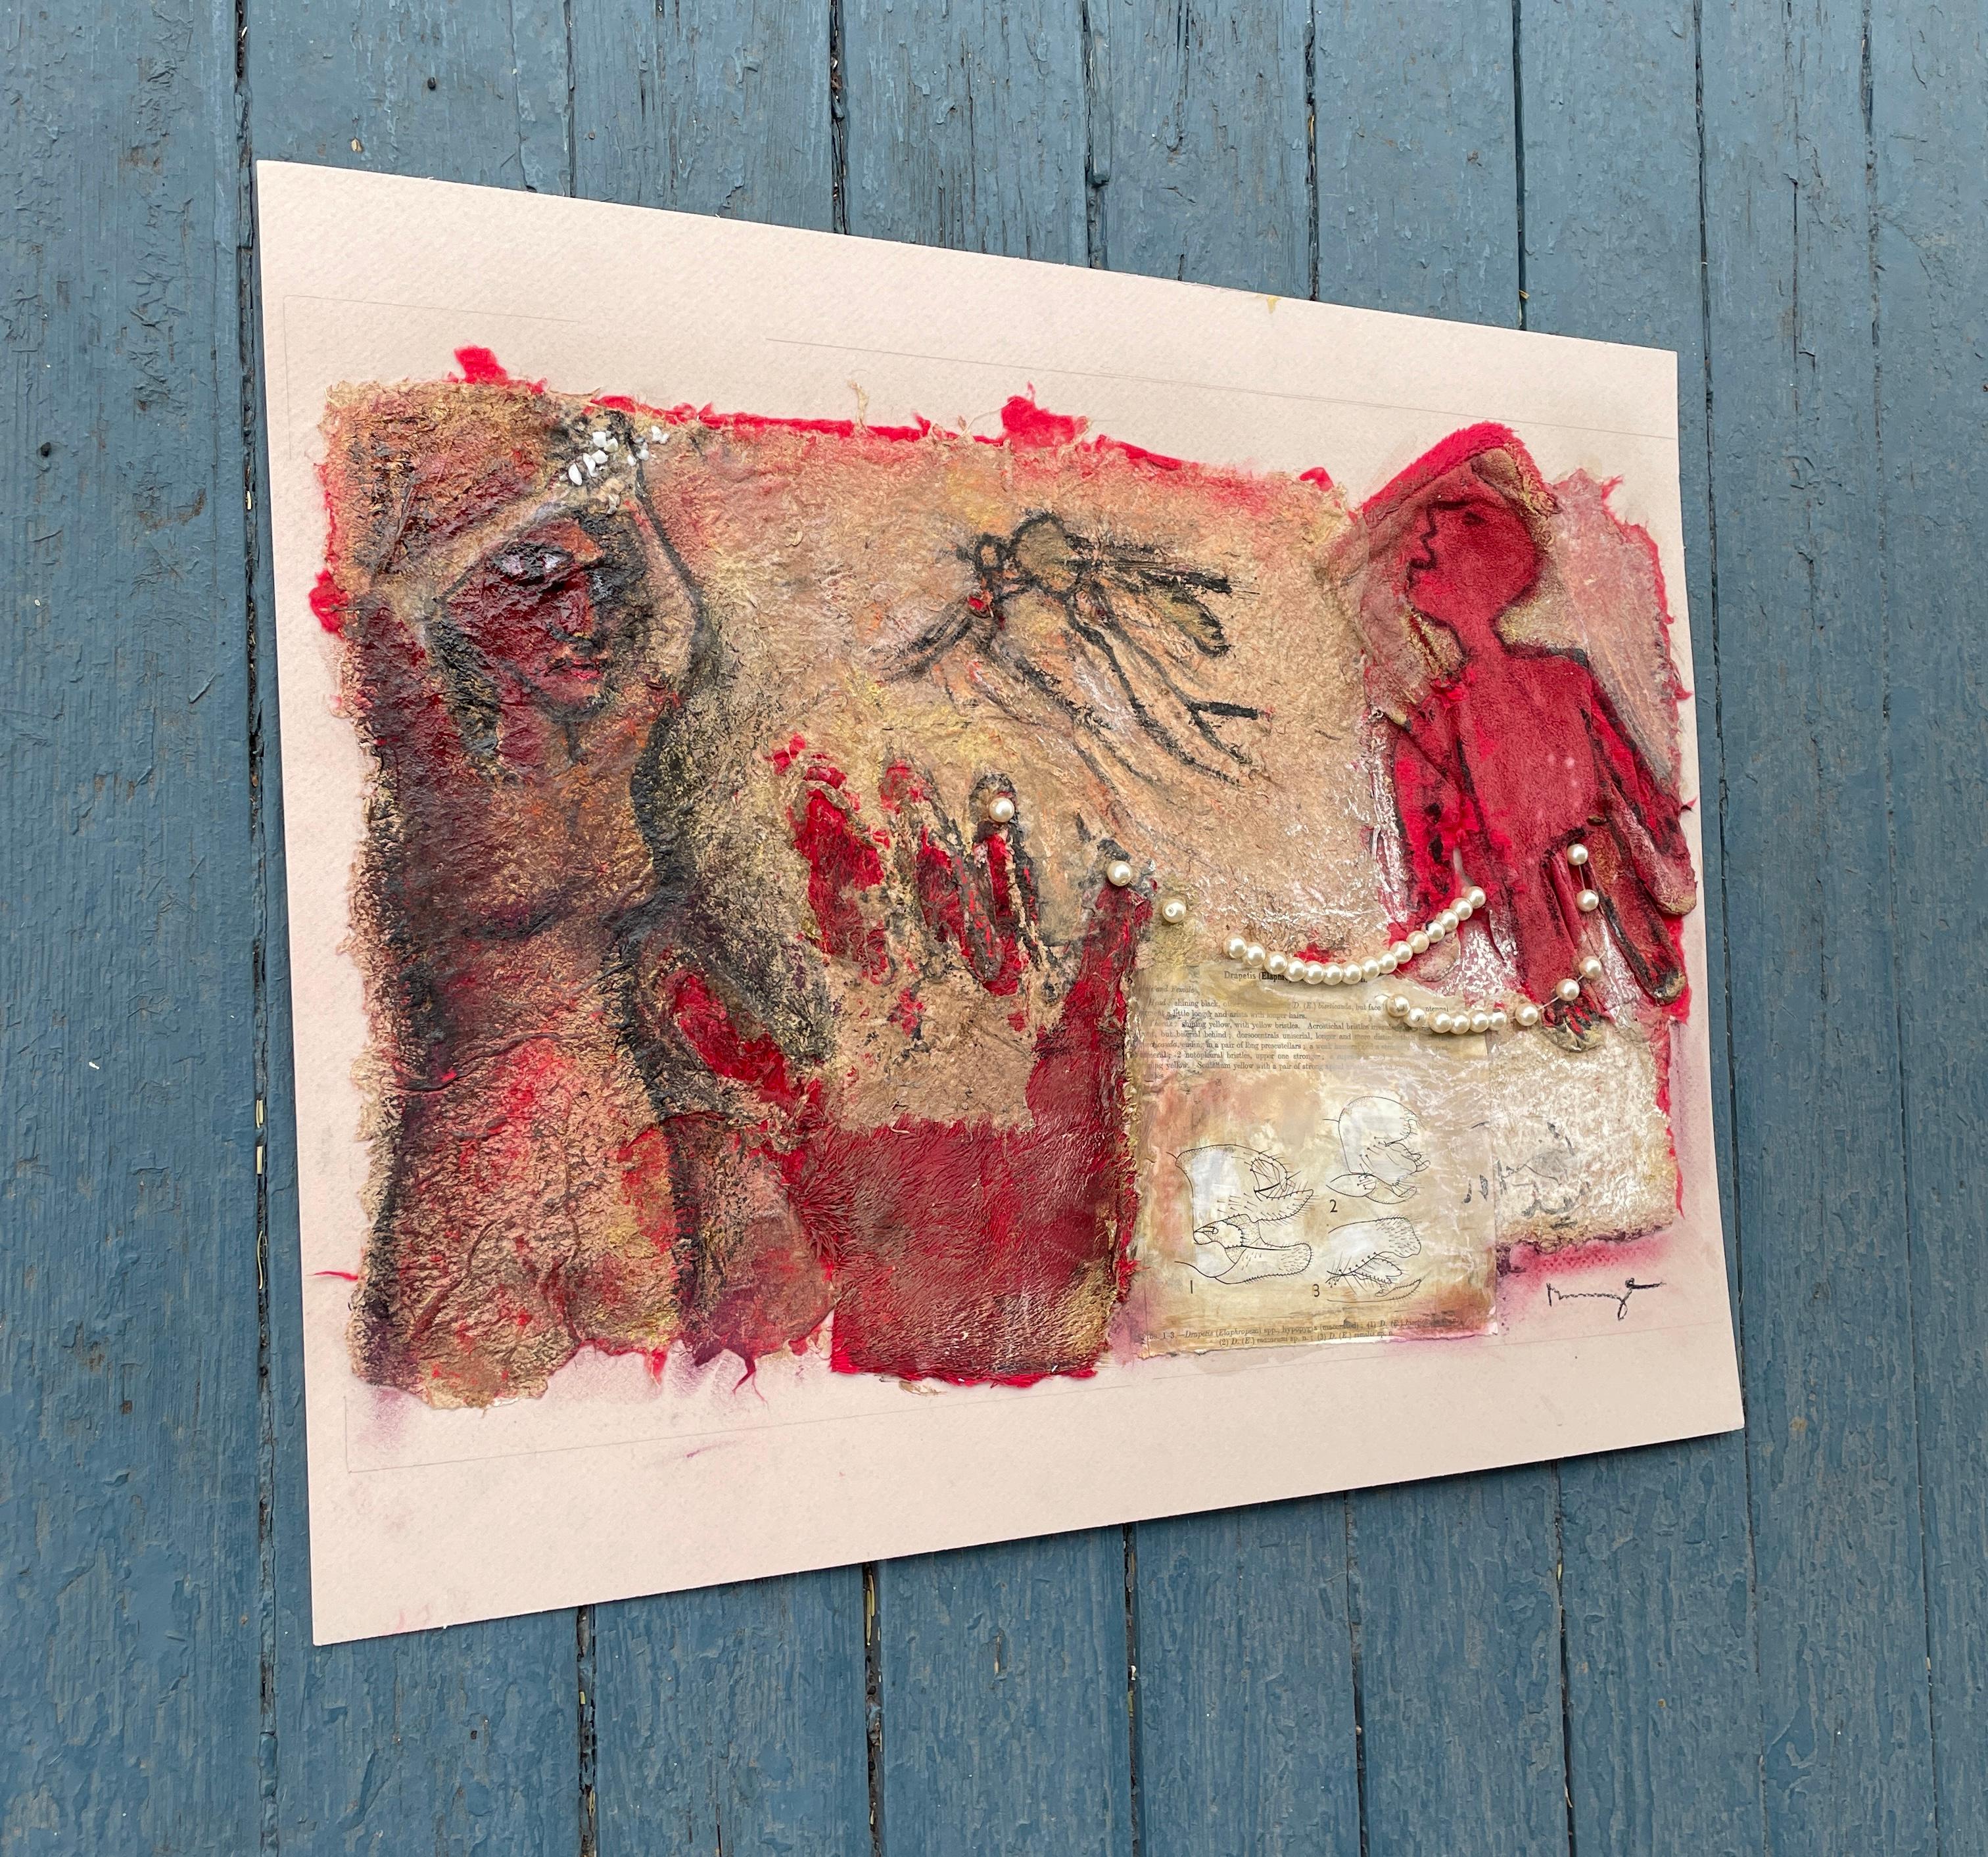 <p>Artist Comments<br>Artist Libby Ramage presents an image of two human figures and an insect. She paints the glove crimson and attaches beads and pages of a book for a revolutionary flair. 